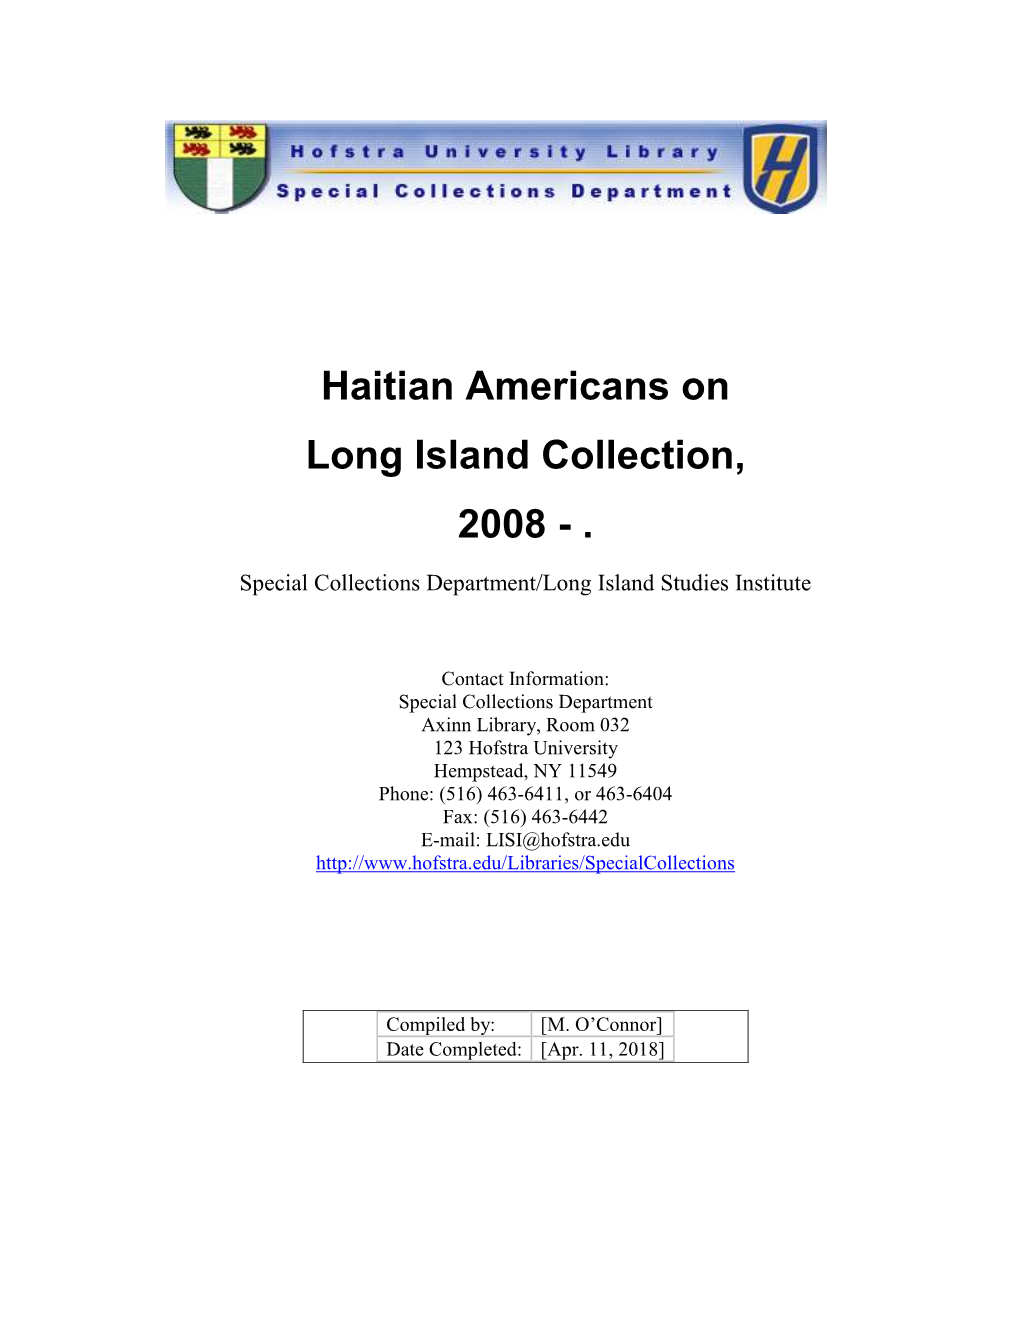 Haitian Americans on Long Island Collection, 2008